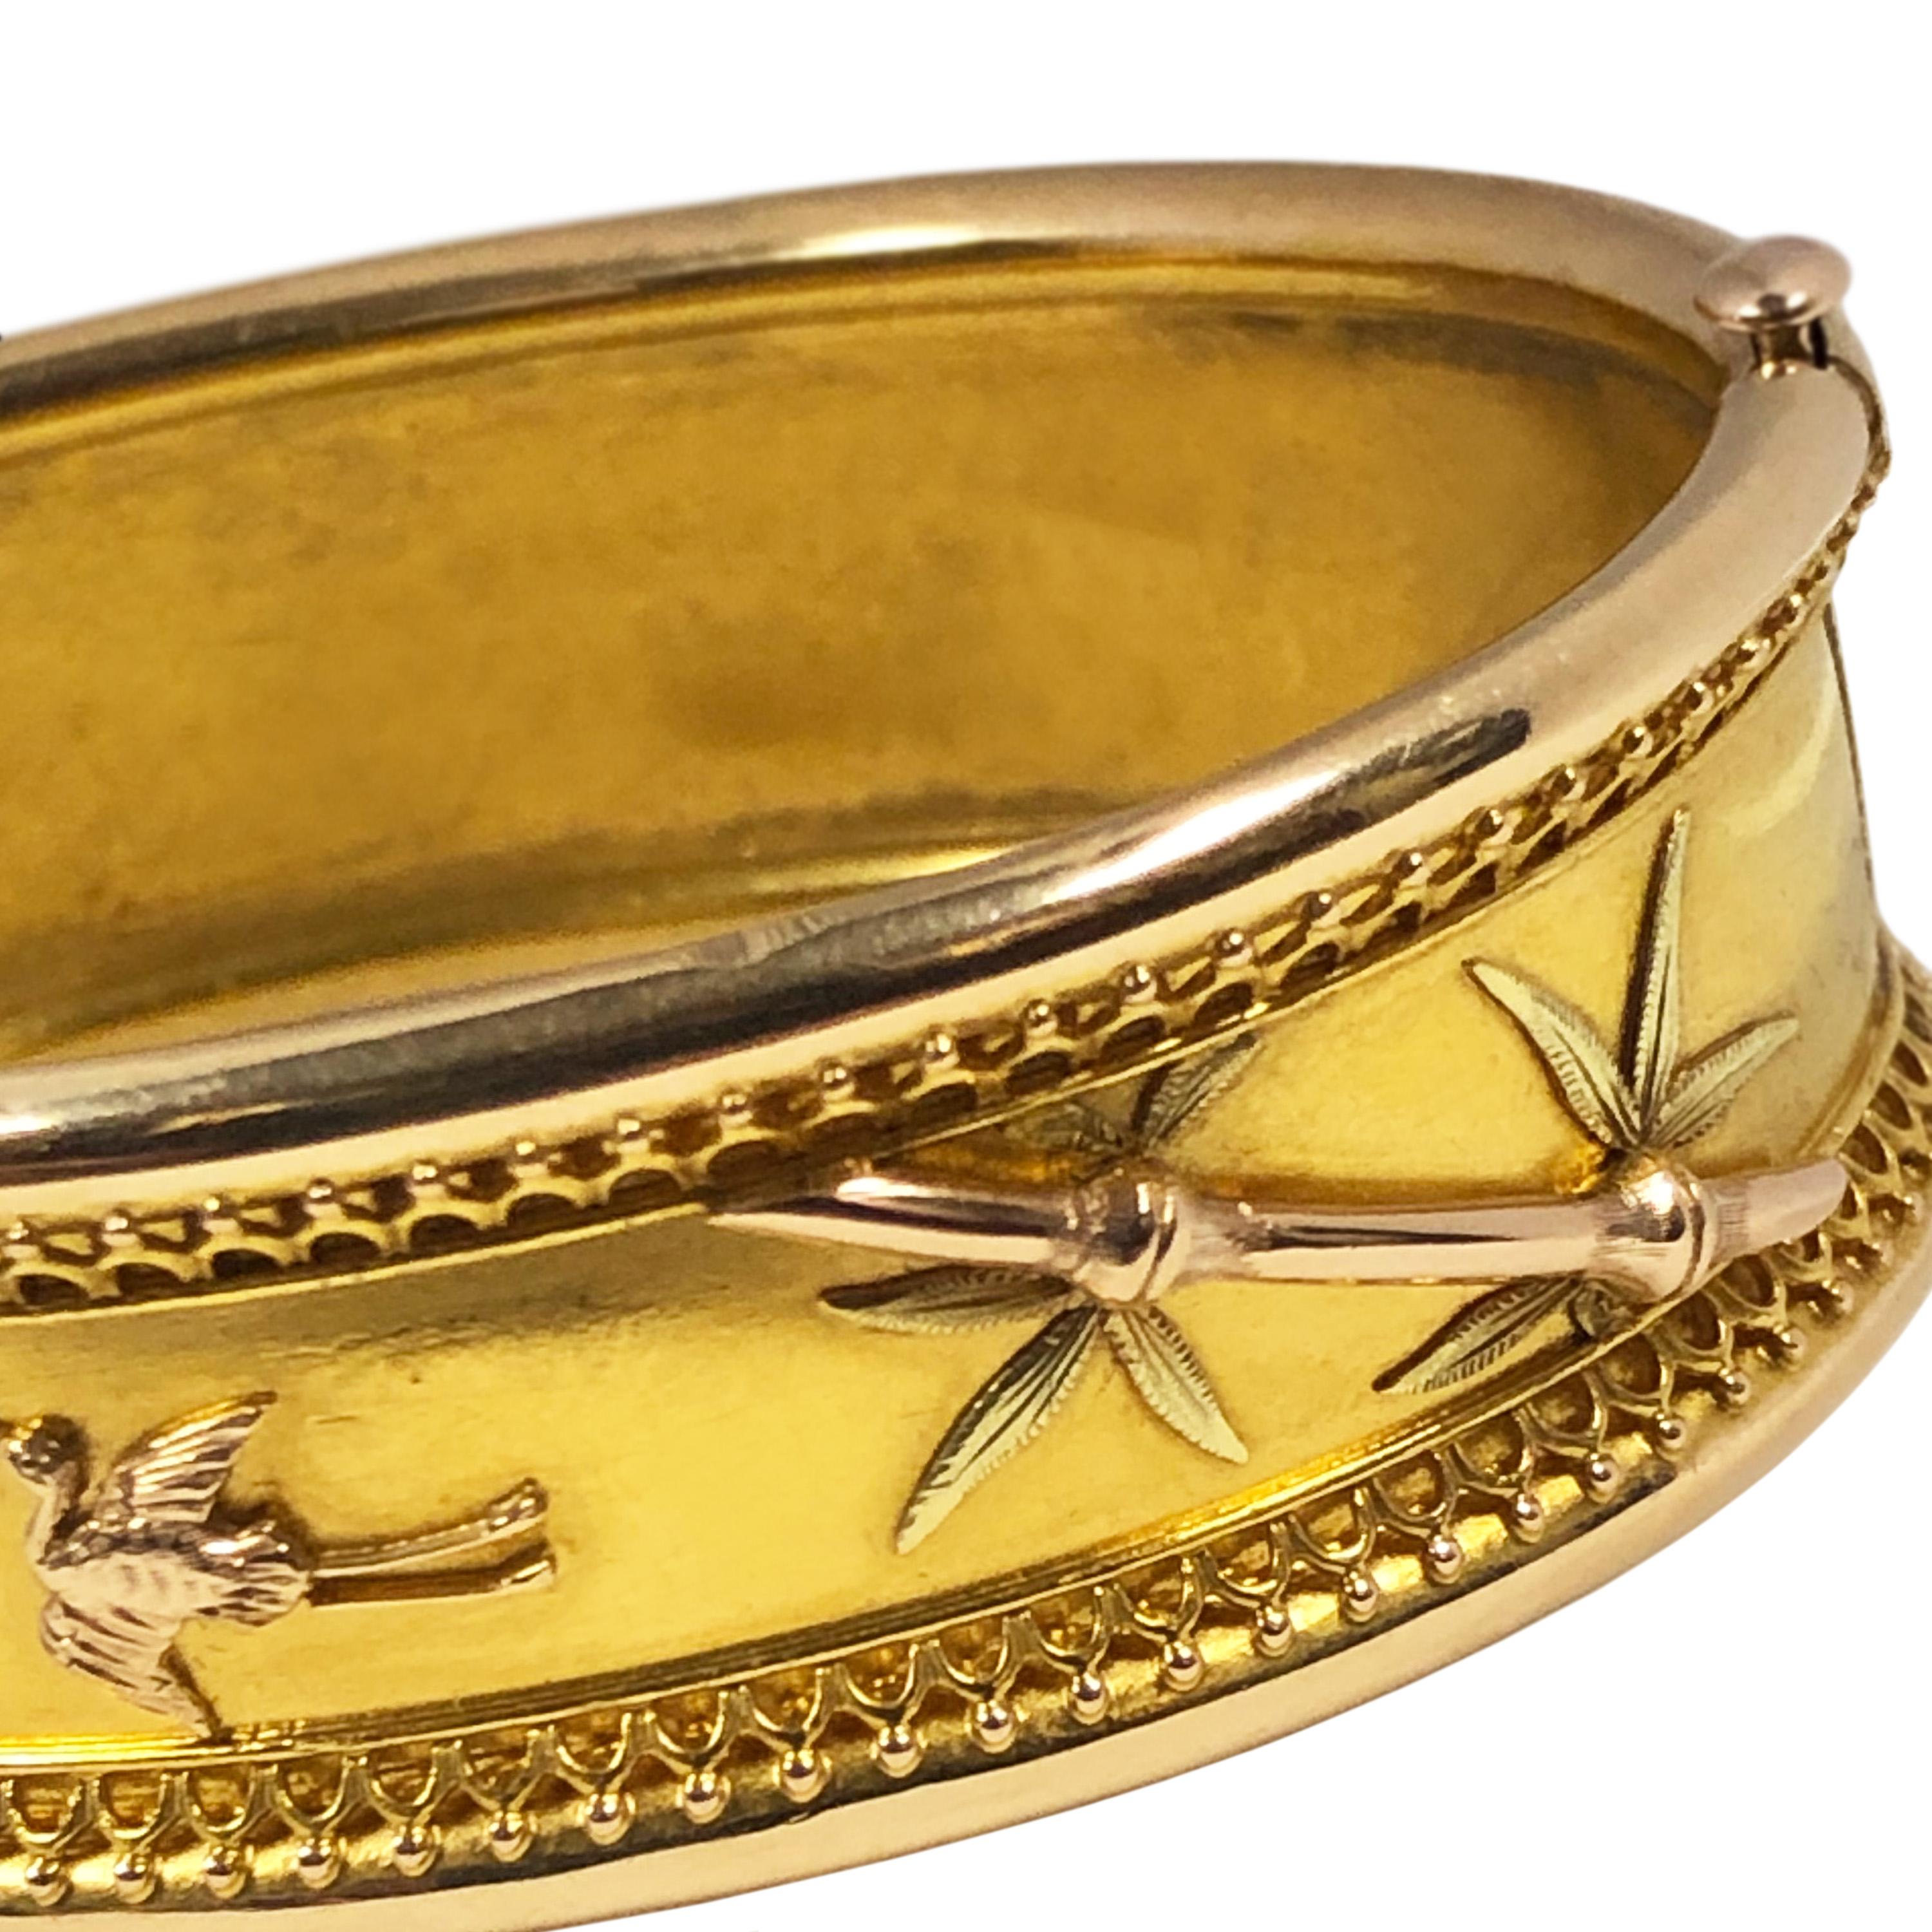 Circa 1880 Aesthetic Movement 14K Yellow Gold Bangle Bracelet, measuring 11/16 inch wide and having applied Red and Green Gold Bamboo plants and Crane Birds. Inside measurement / wrist size 6 1/2 inches. 